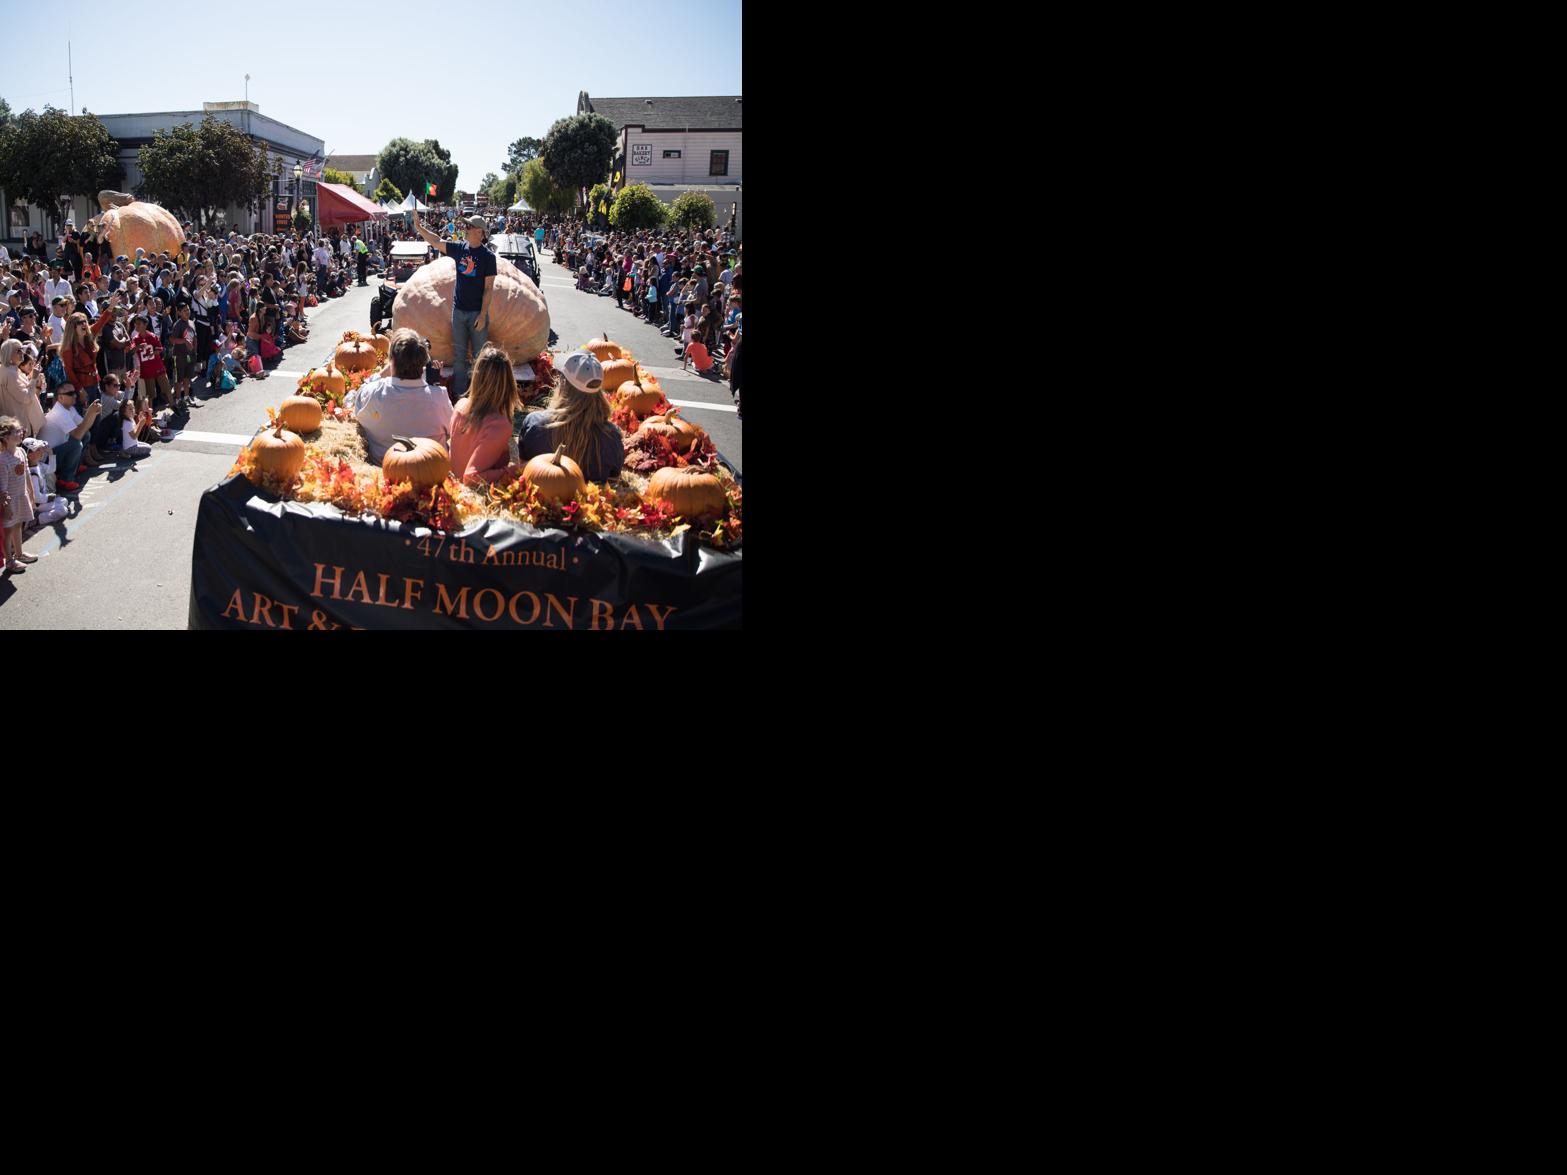 Thousands come to Pumpkin Festival Local News Stories